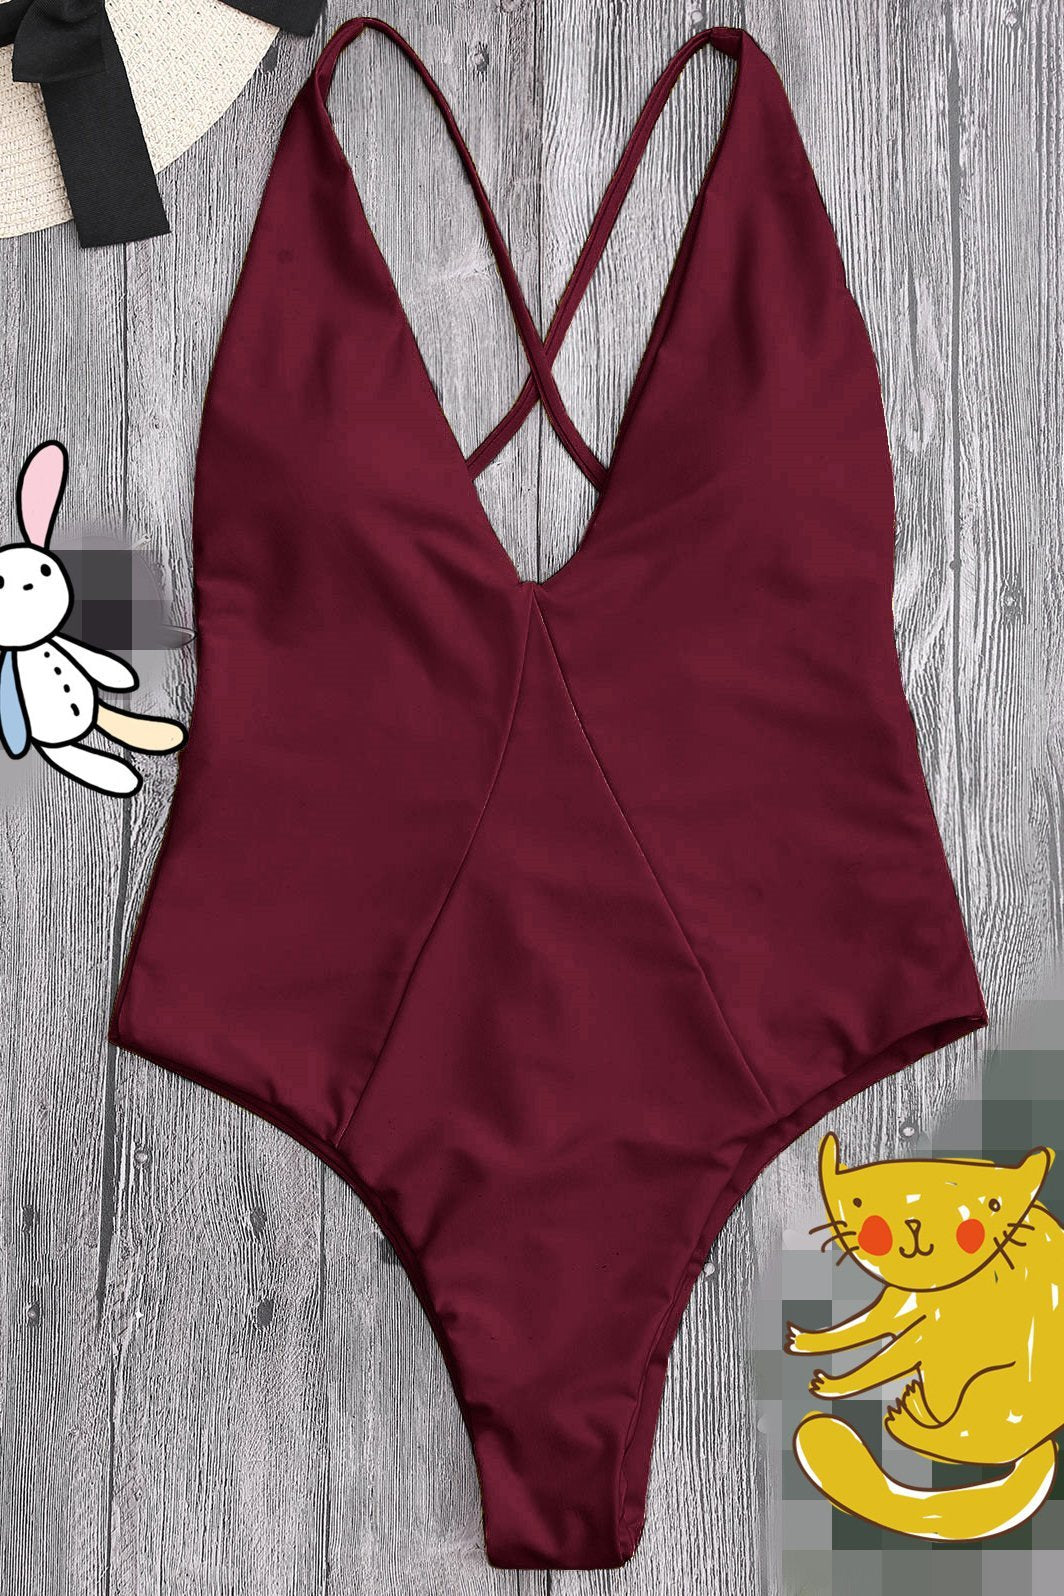 Burgundy Plunge V Neck High Cut Cross Back Sexy One Piece Swimsuit